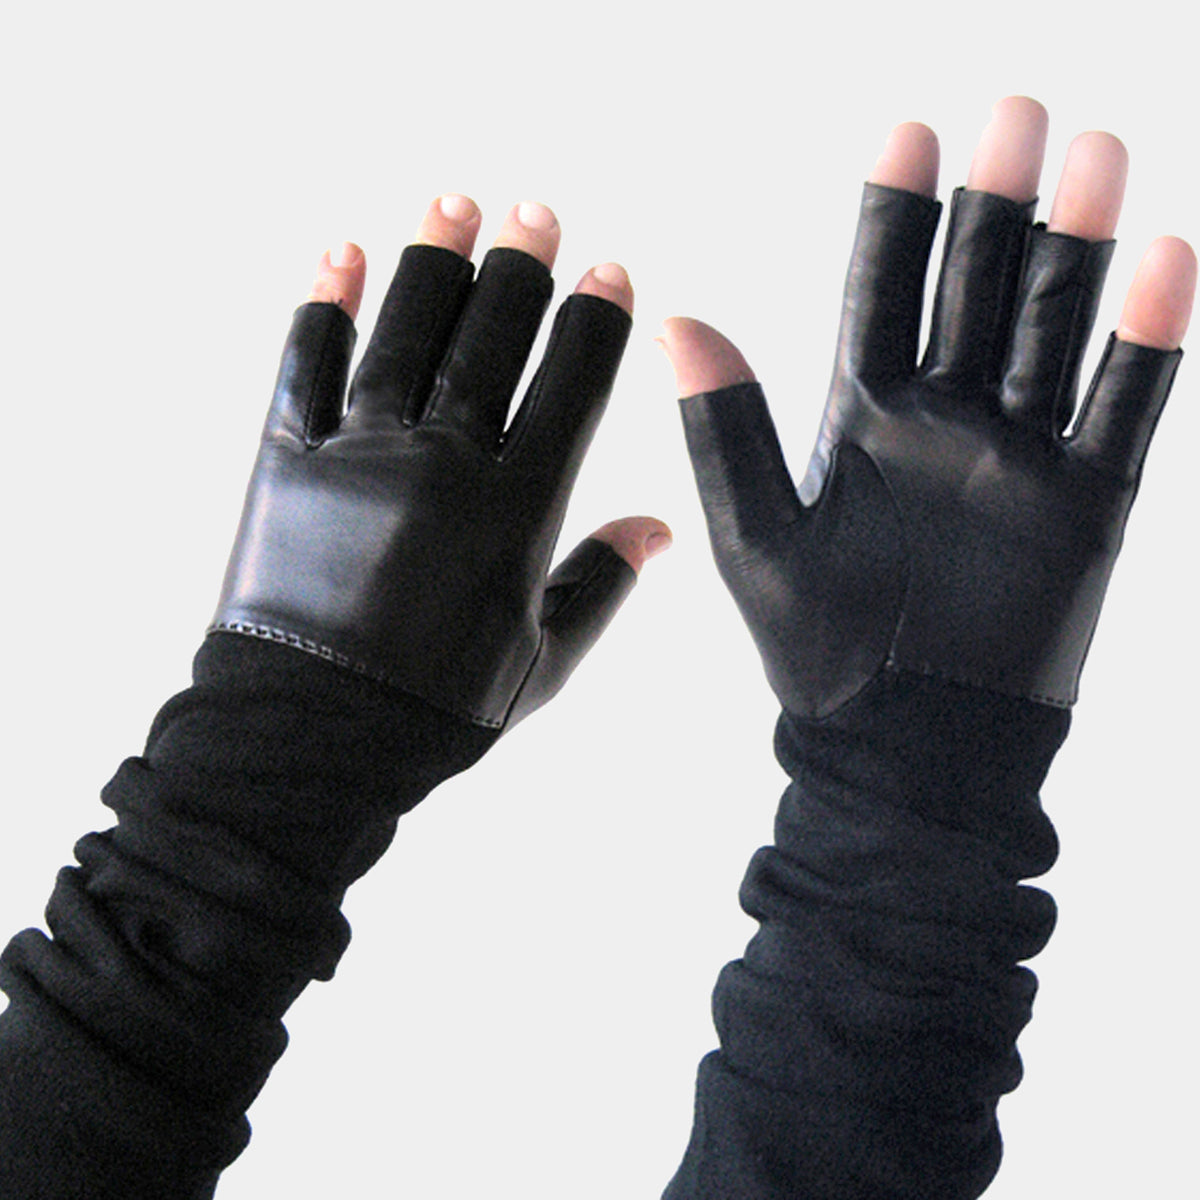 KNIT FINGERLESS GLOVES AND MENS LEATHER